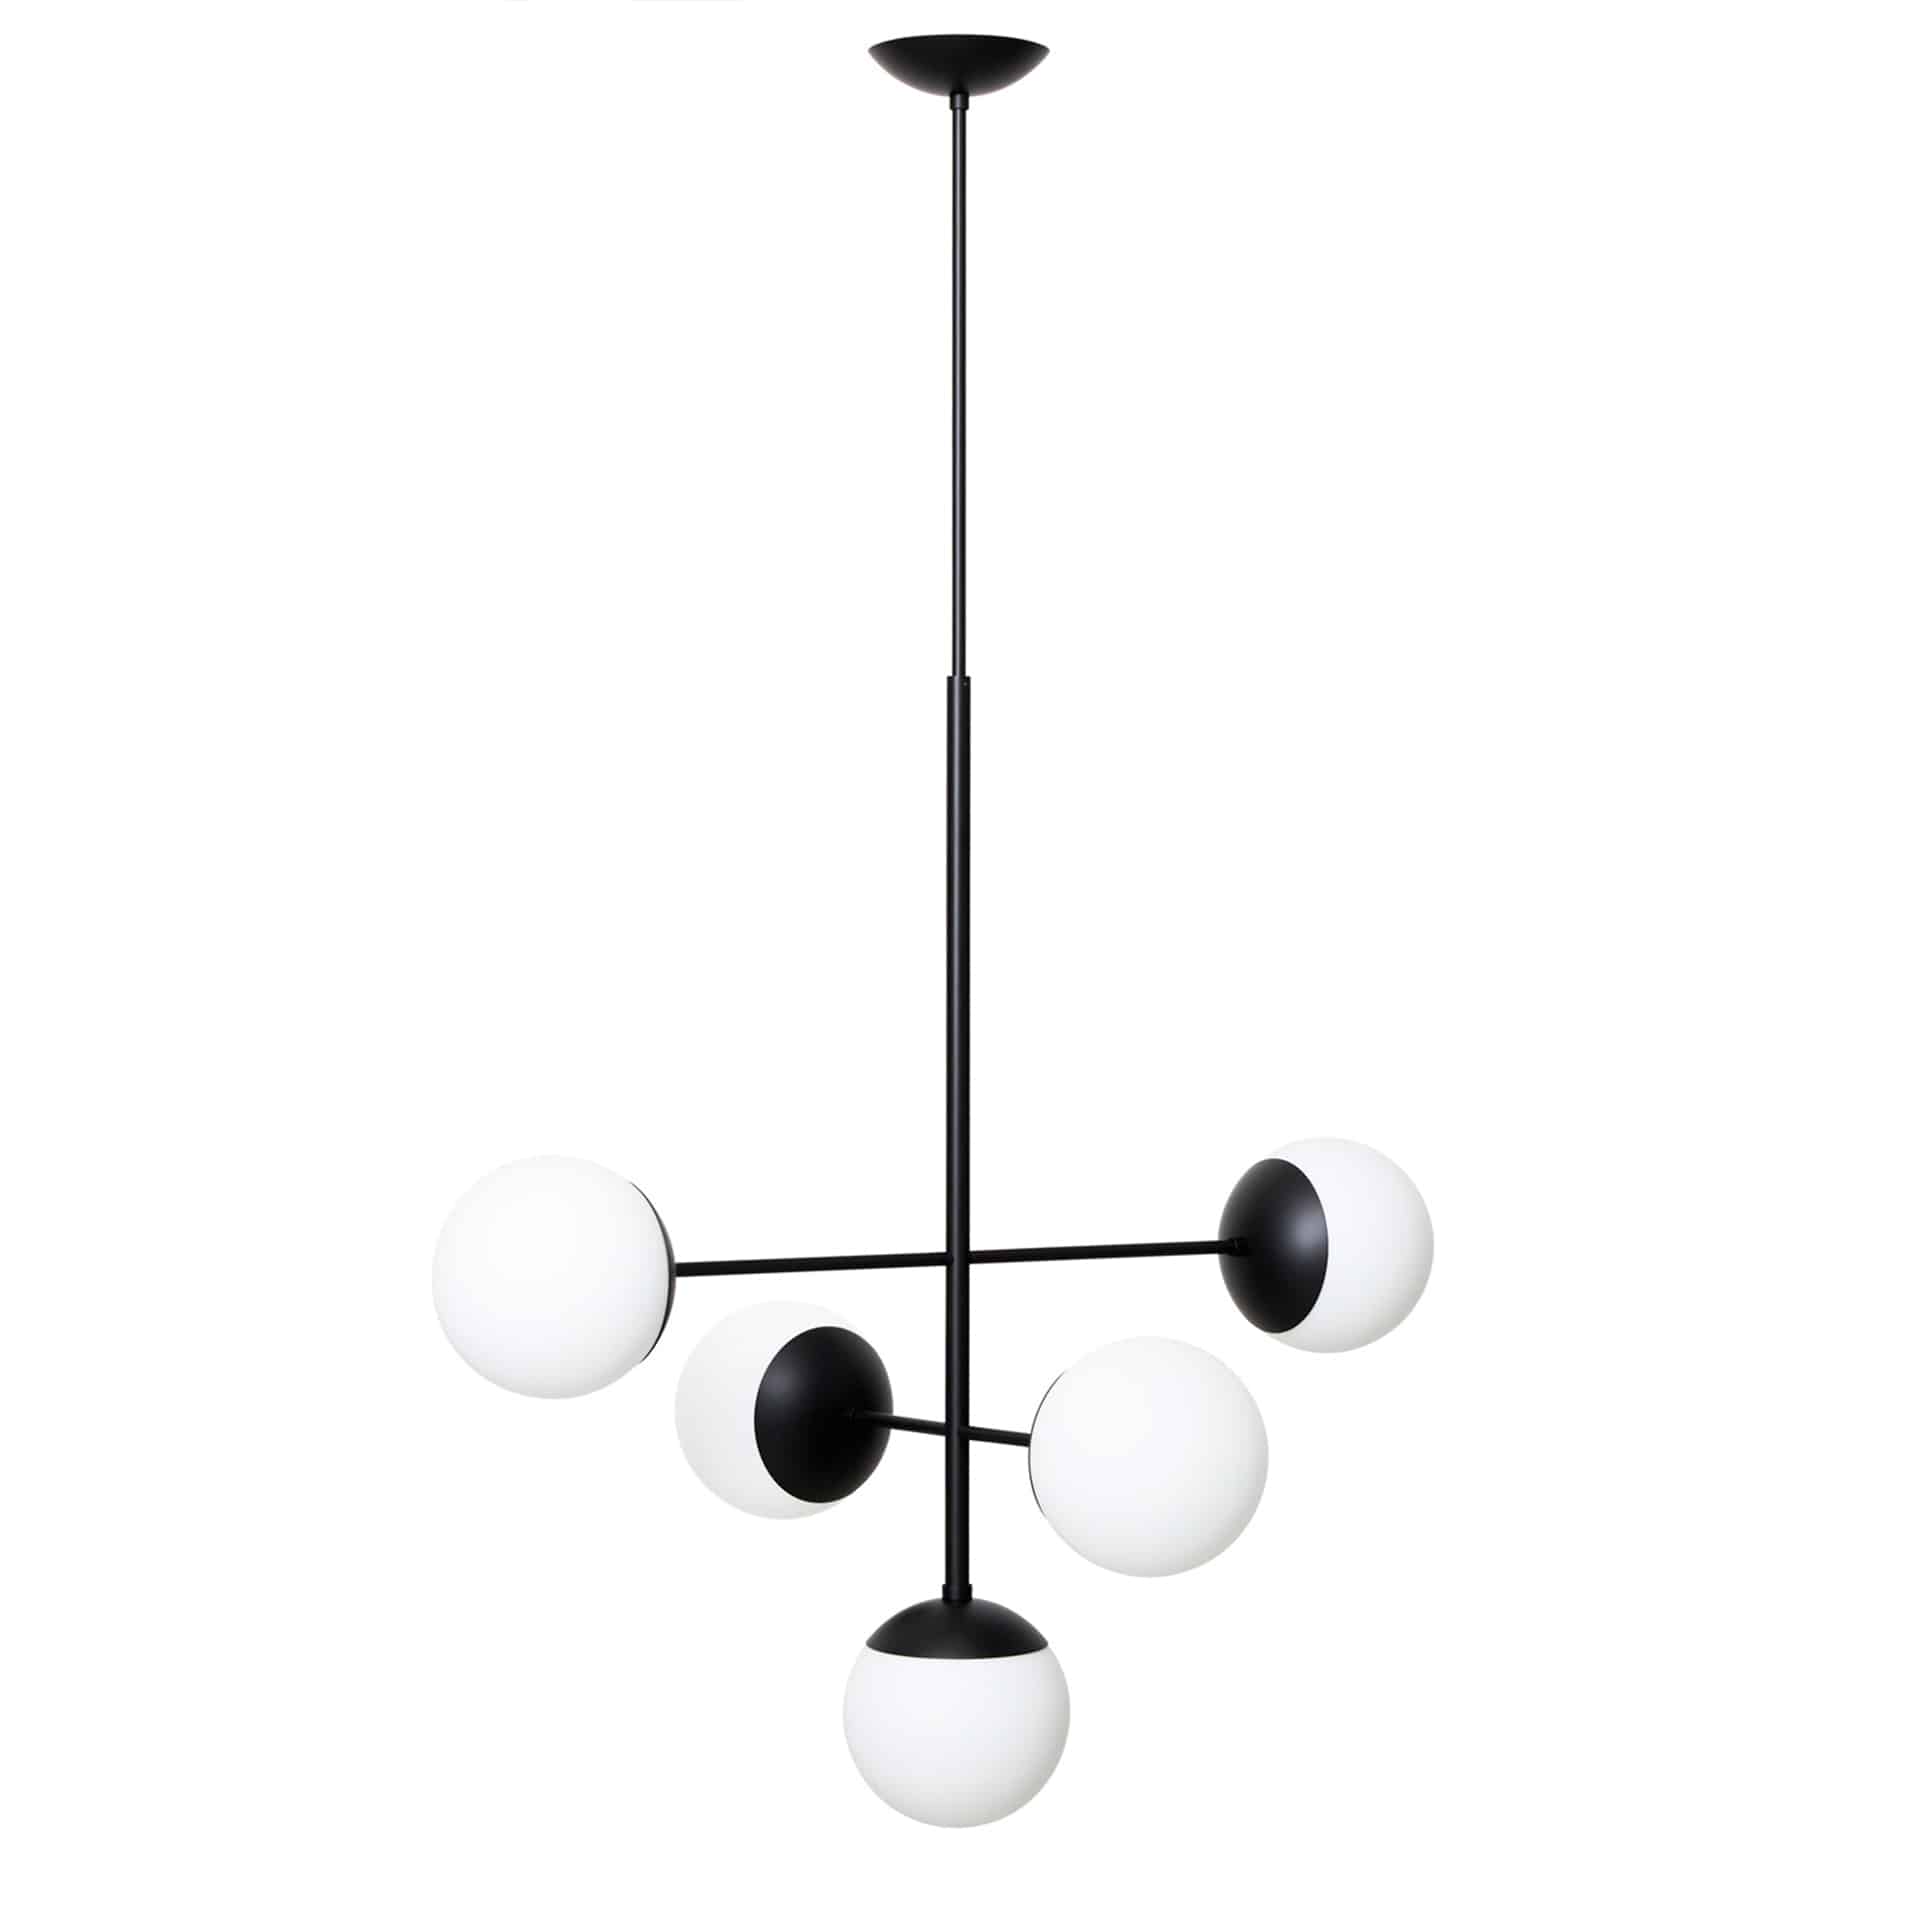 RUBN-ceiling-lamp-lord-chandelier-black-opal-glass-product-picture